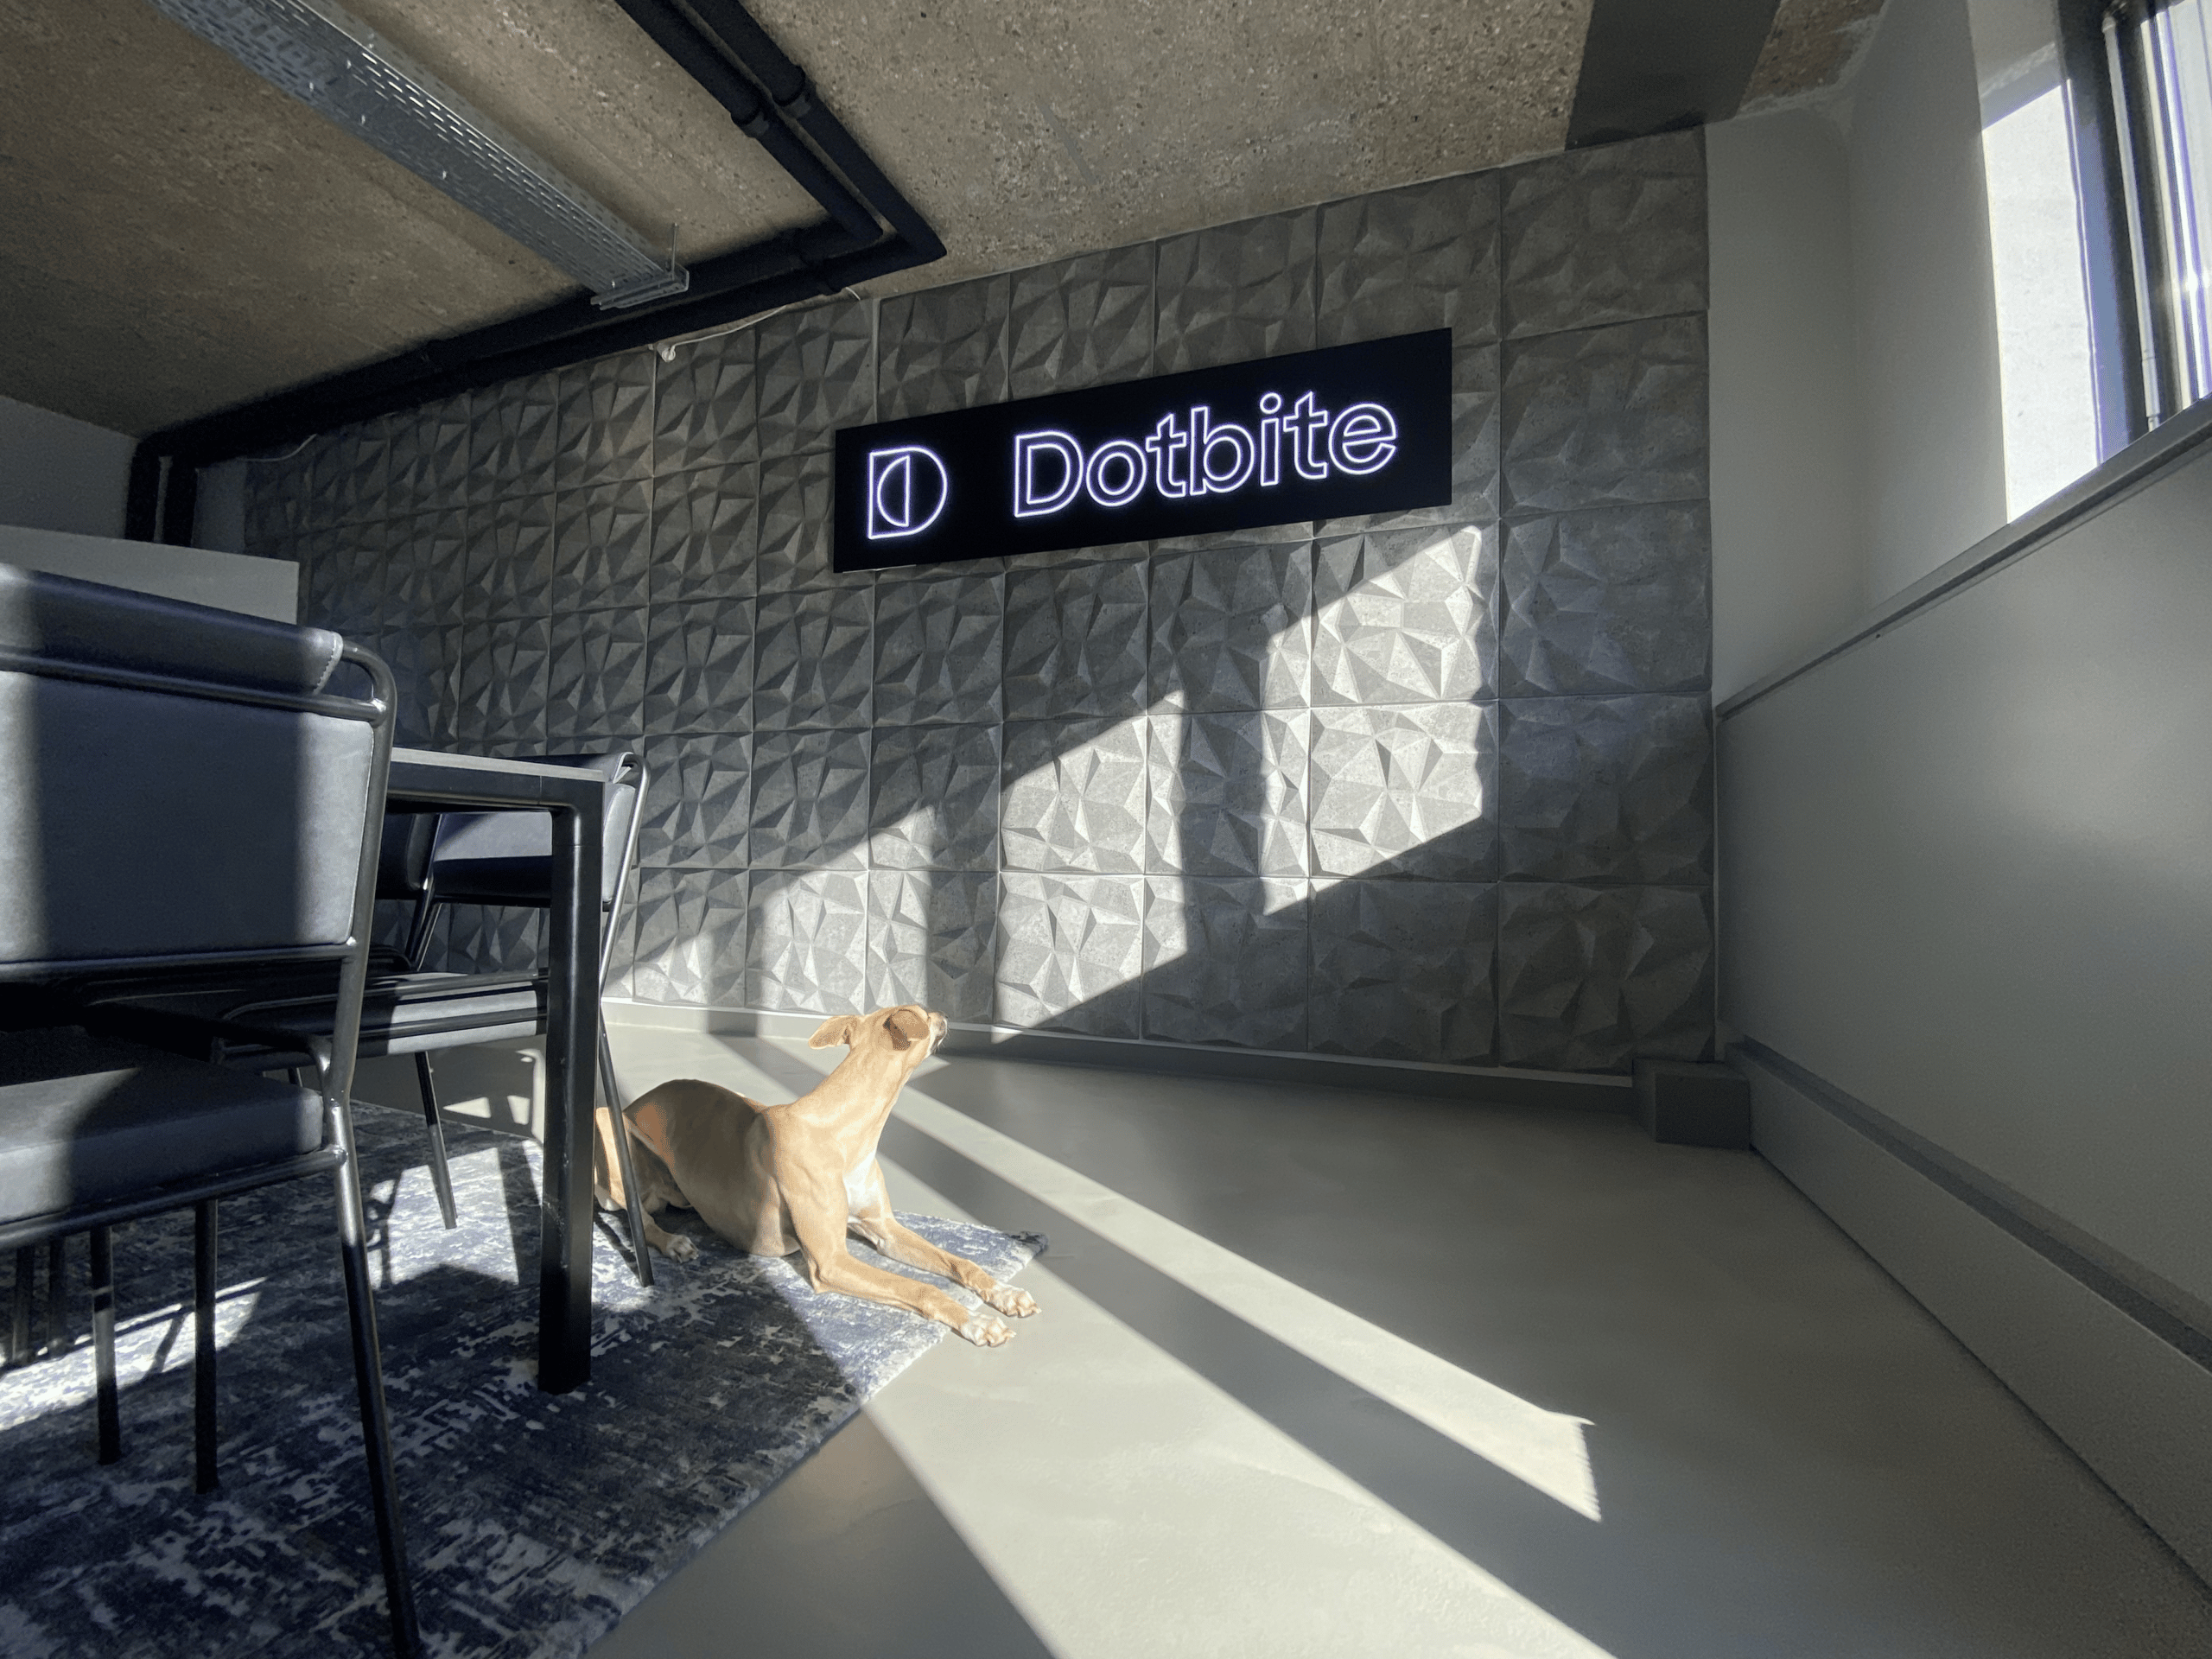 Meeting room with dog